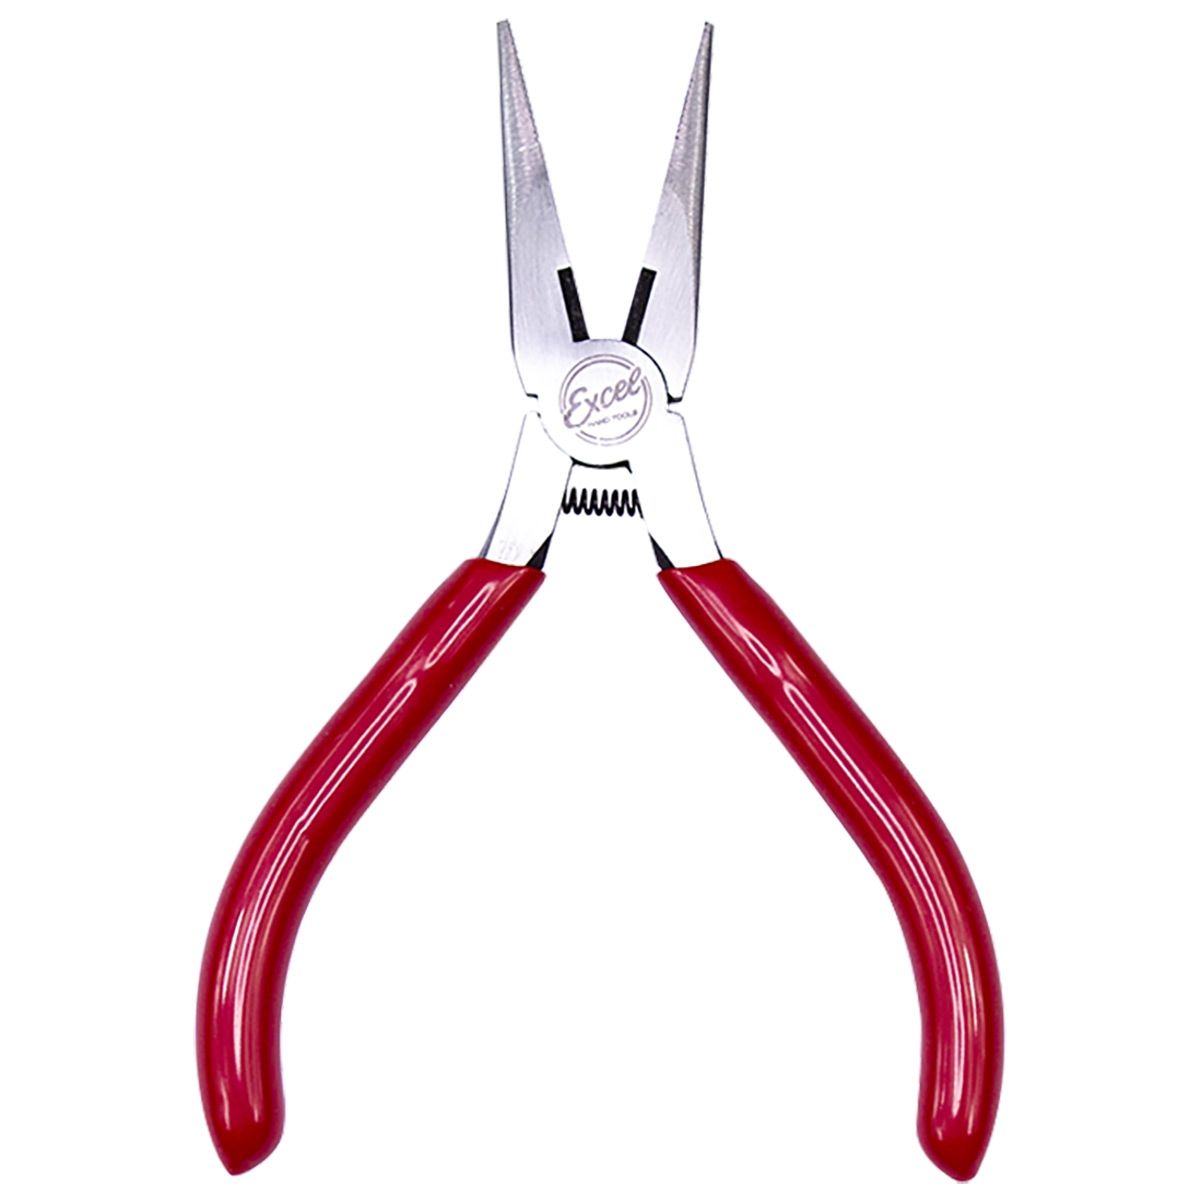 Excel 5in Needle Nose Pliers w/ Side Cutter